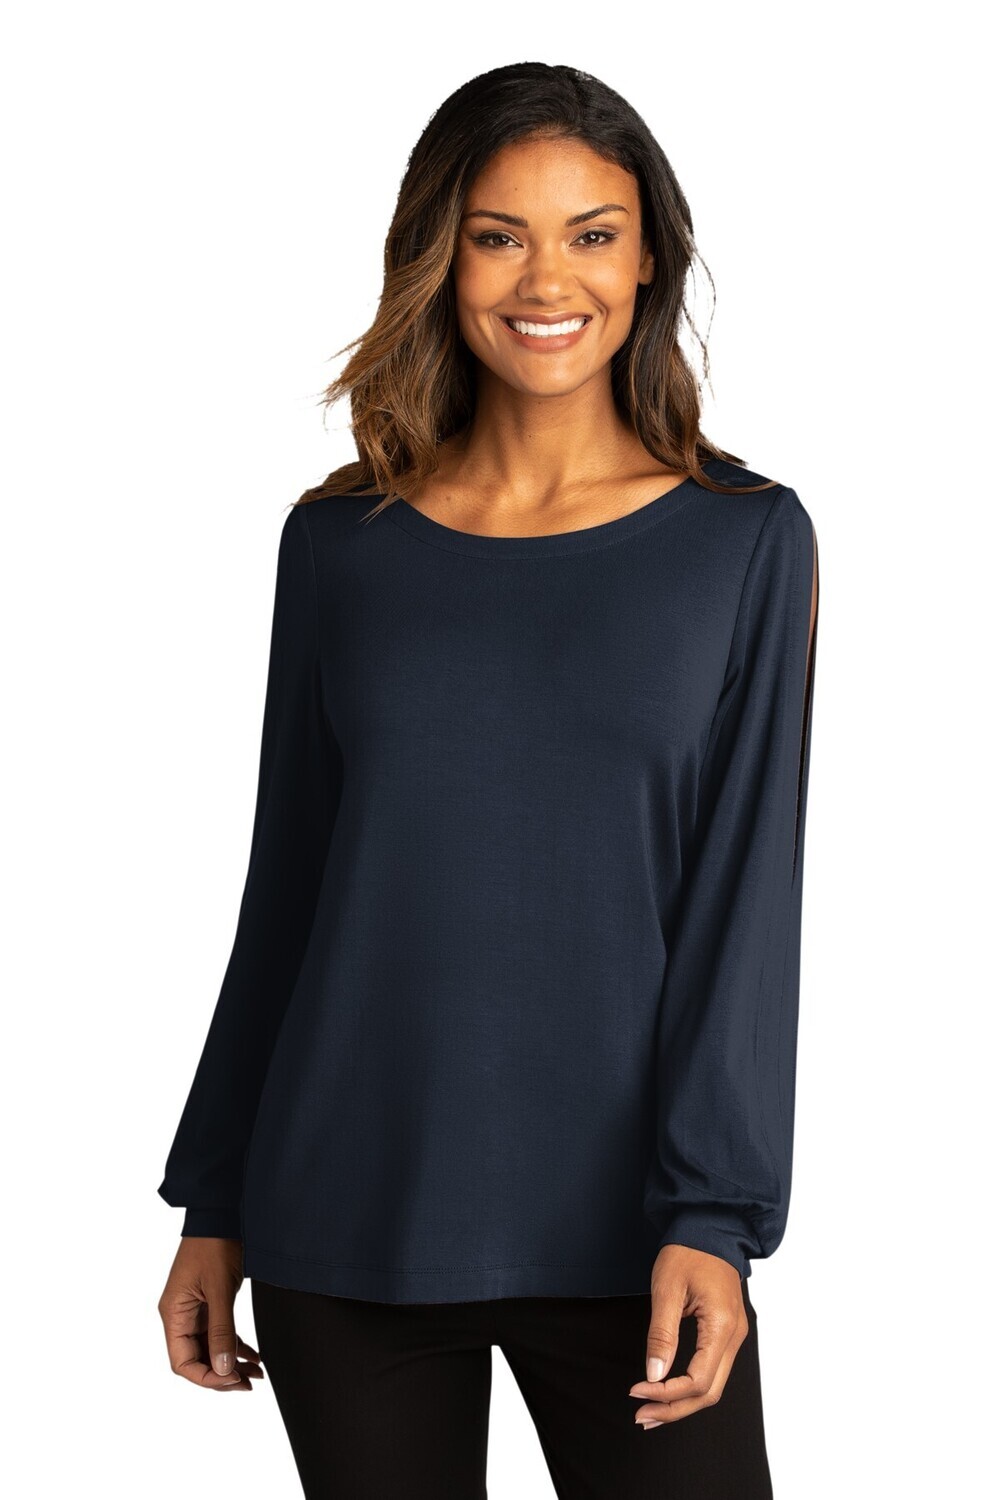 PORT AUTHORITY LADIES LUXE KNIT TOP (LK5600) RIVER NAVY BLUE - SMALL